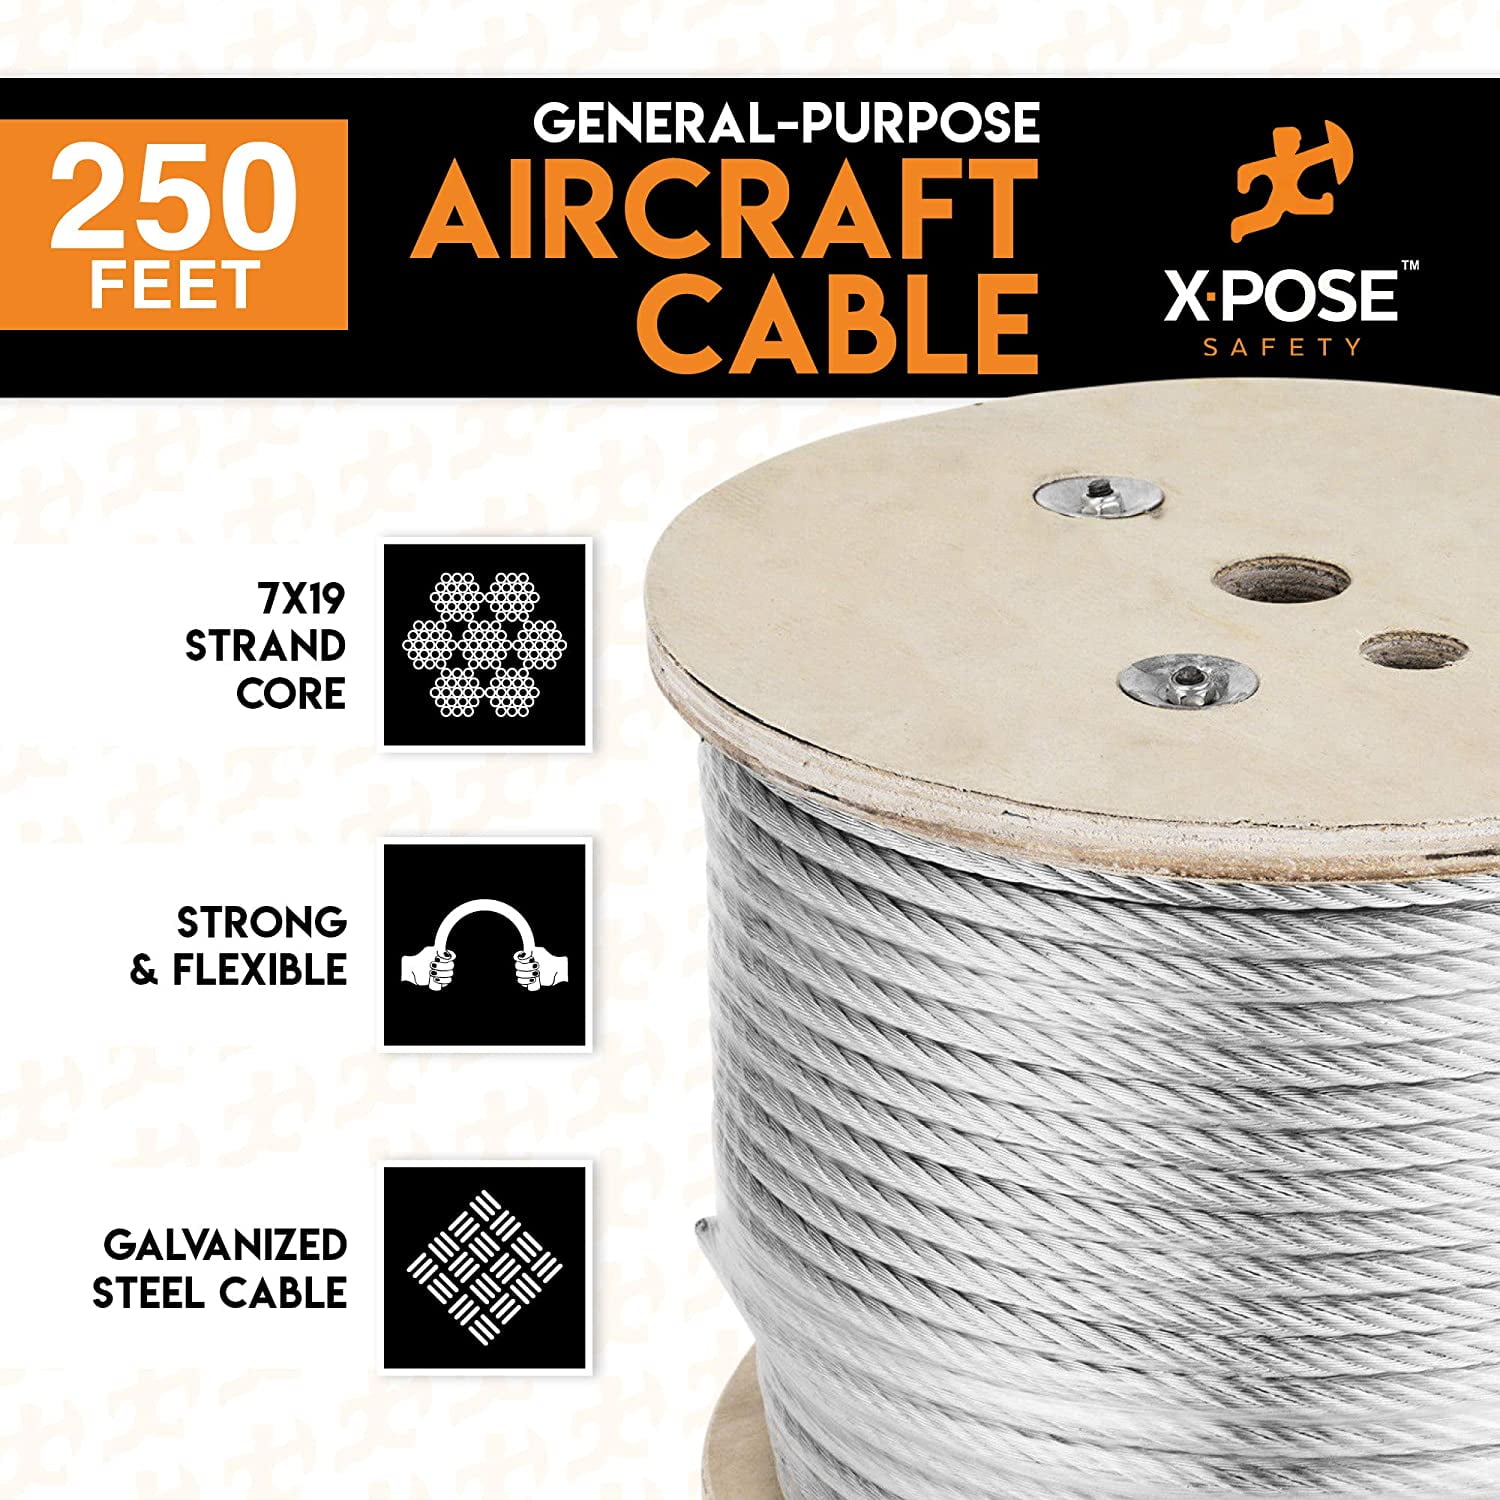 250 Feet 1/4" Galvanized Aircraft Cable Steel Wire Rope 7x19 